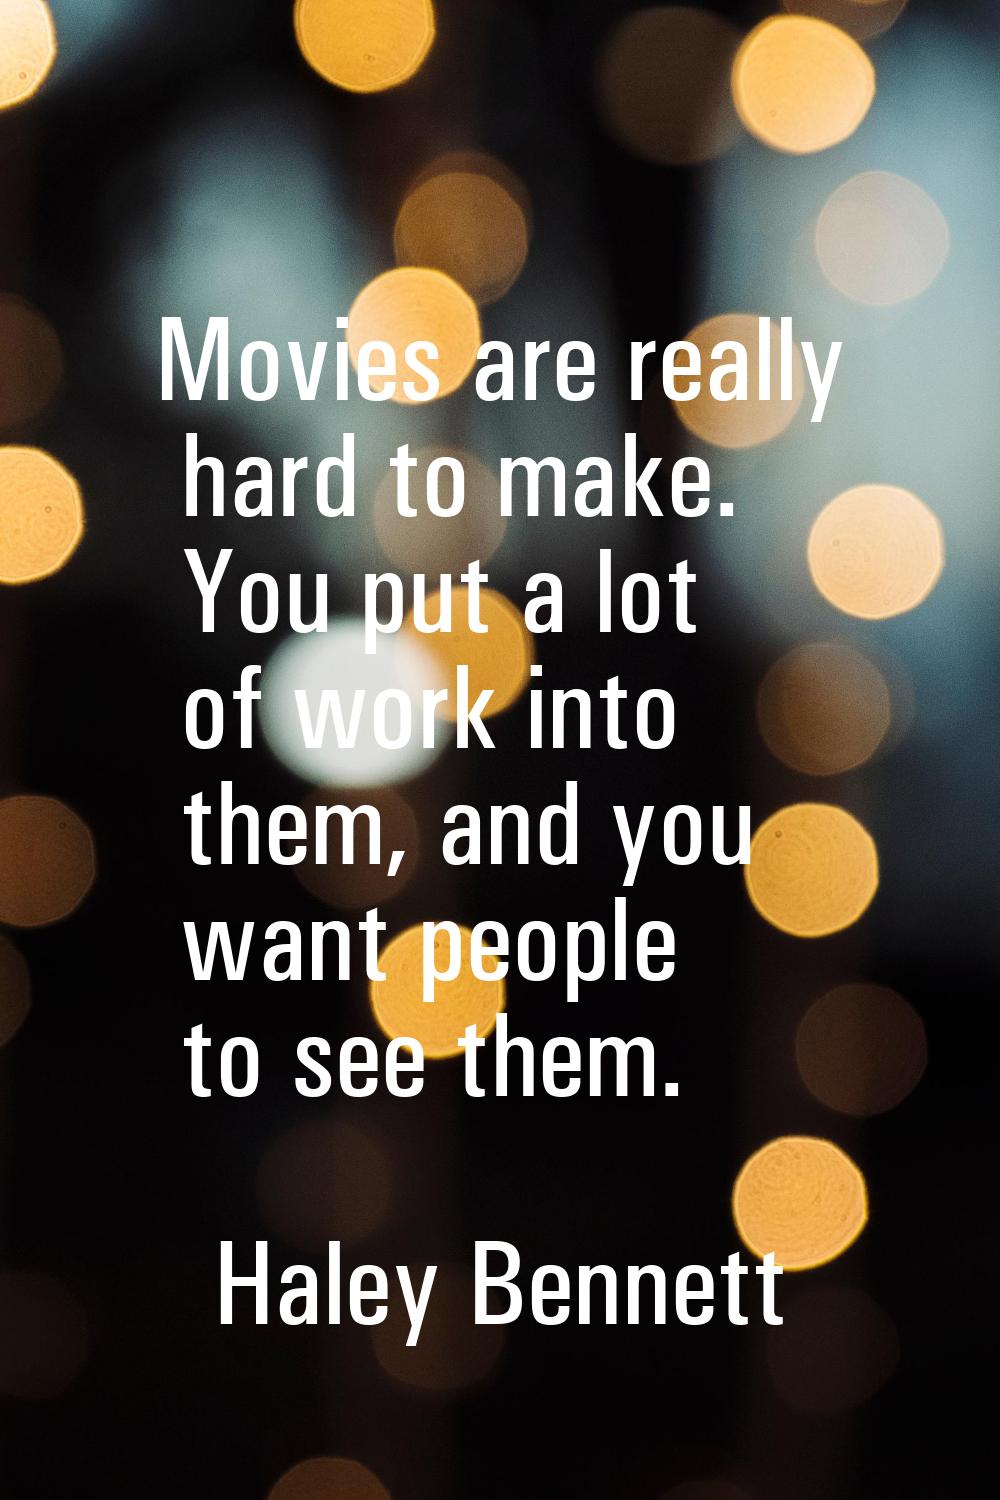 Movies are really hard to make. You put a lot of work into them, and you want people to see them.